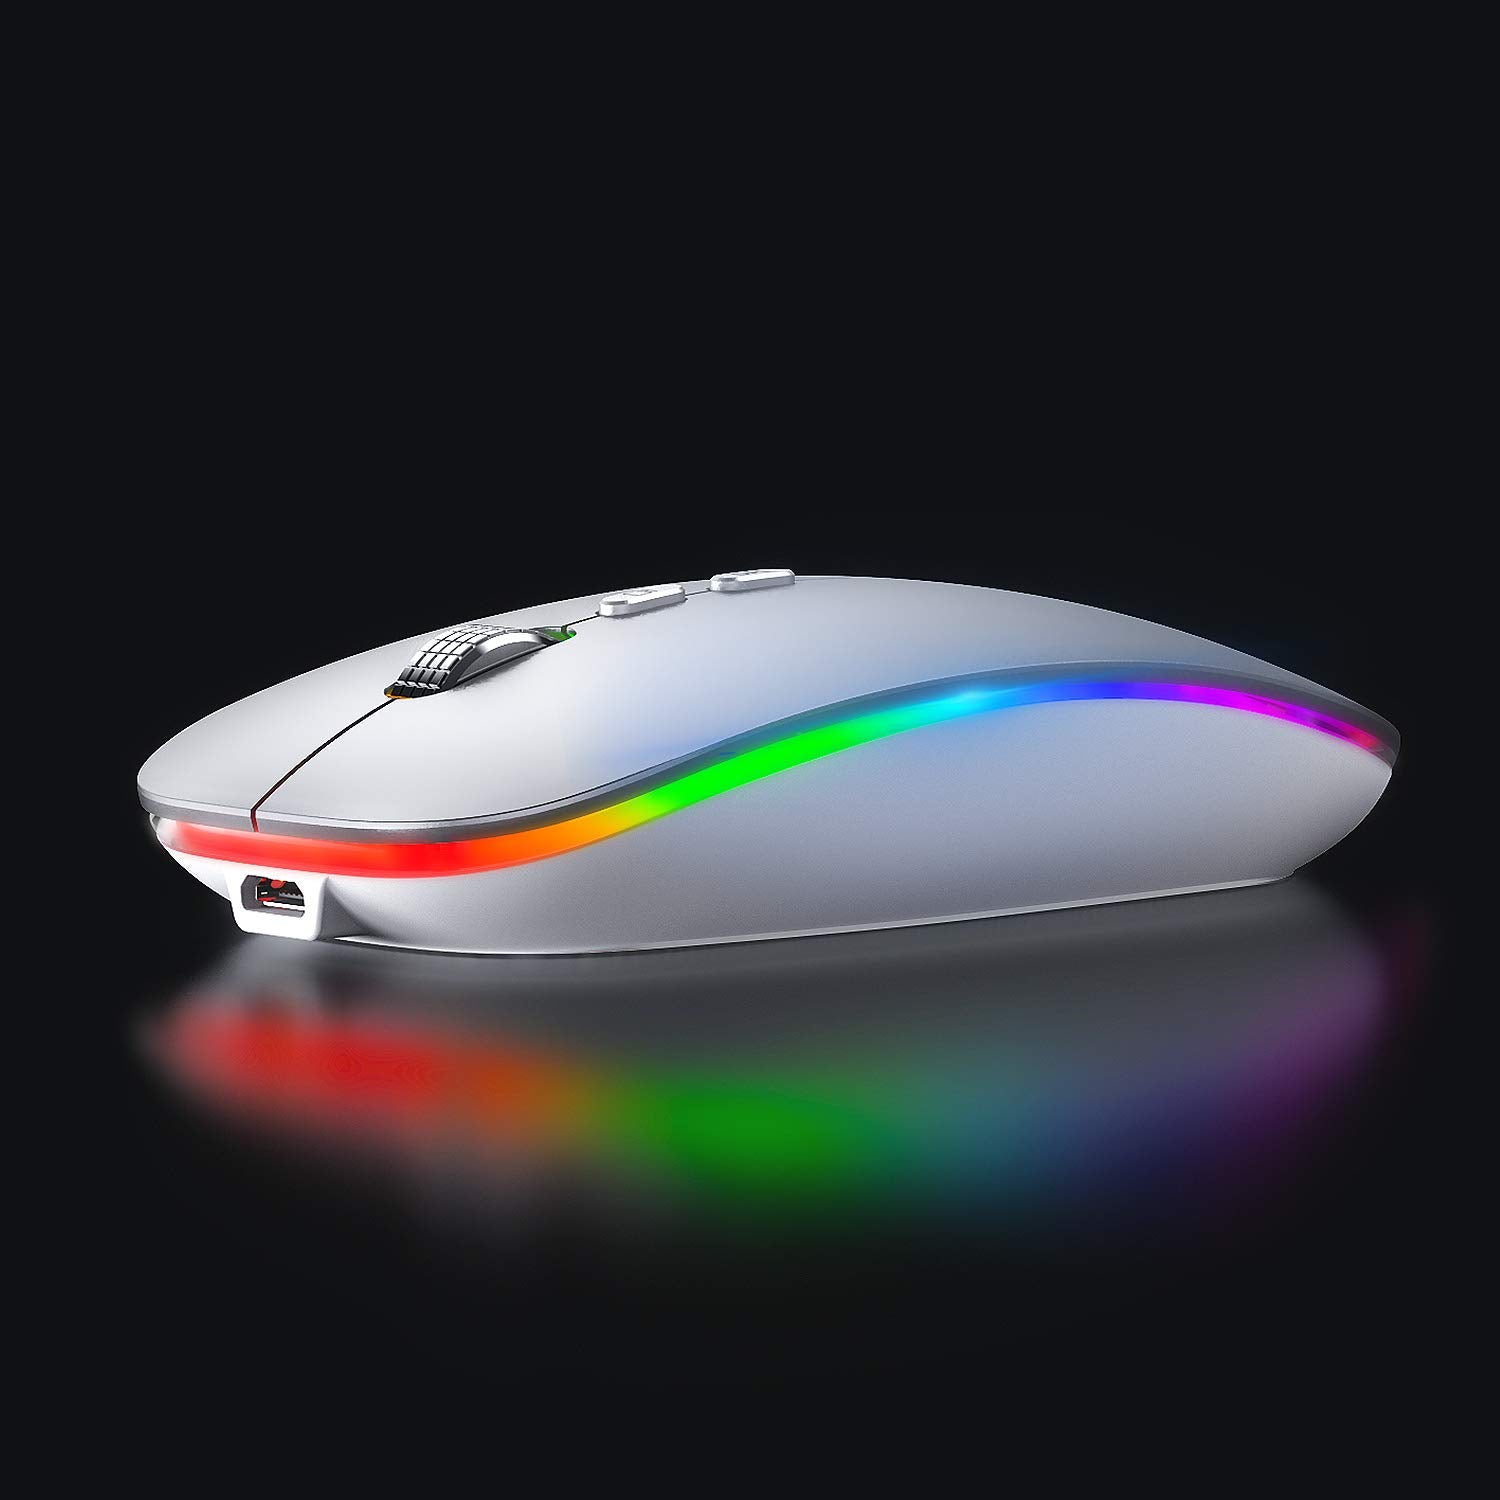 INPHIC LED Wireless Mouse, Rechargeable Silent 2.4G Wireless Computer Mouse with USB Receiver, Untra Thin RGB Backlit Cordless Mice for Laptop, PC,Mac, Silver